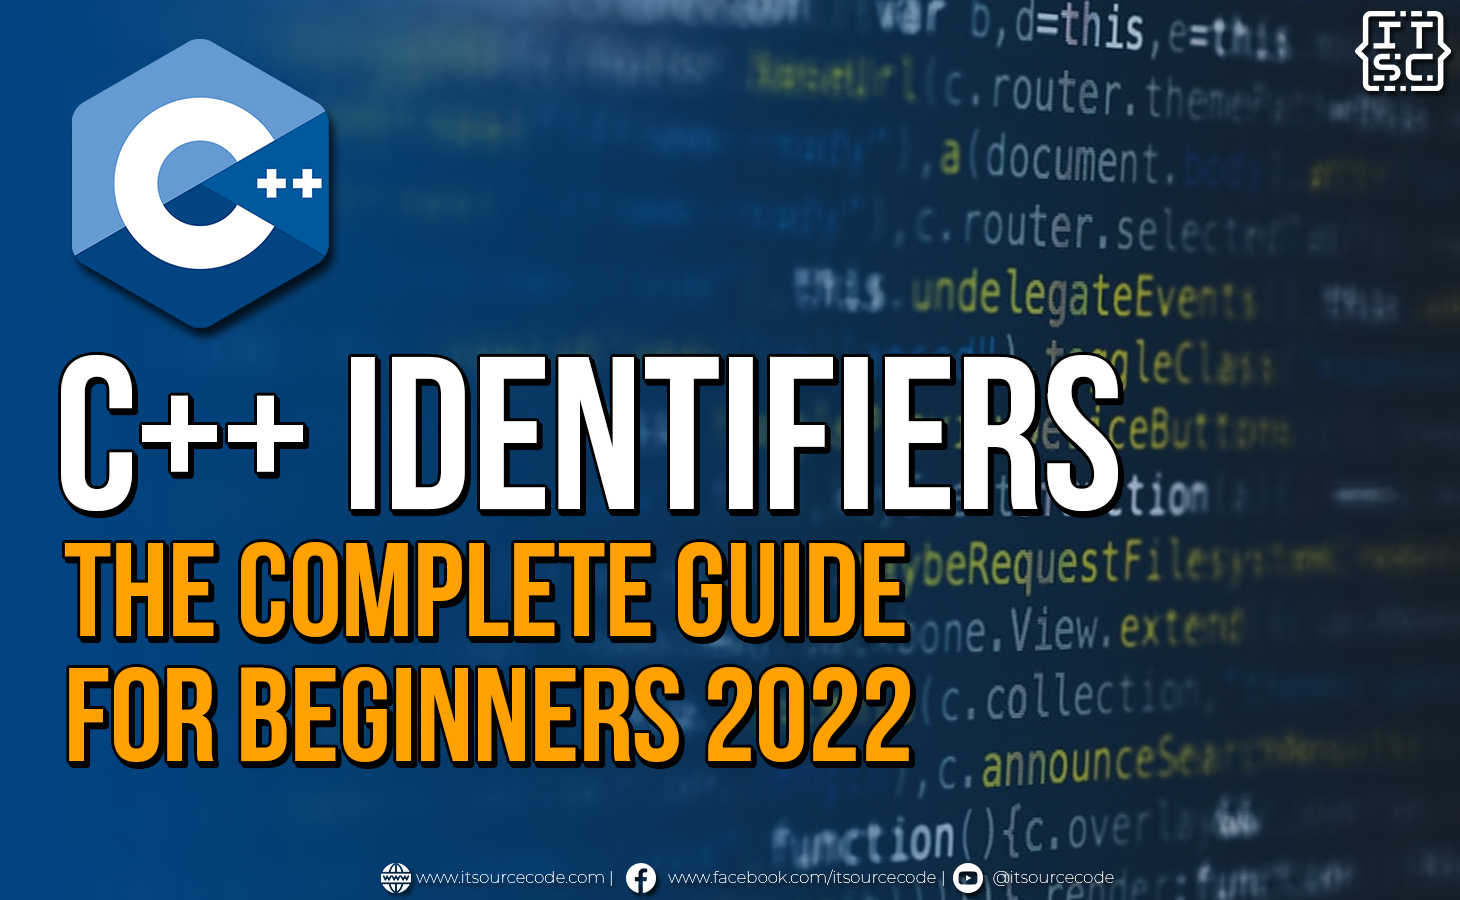 C++ Identifiers - The complete guide for beginners 2022